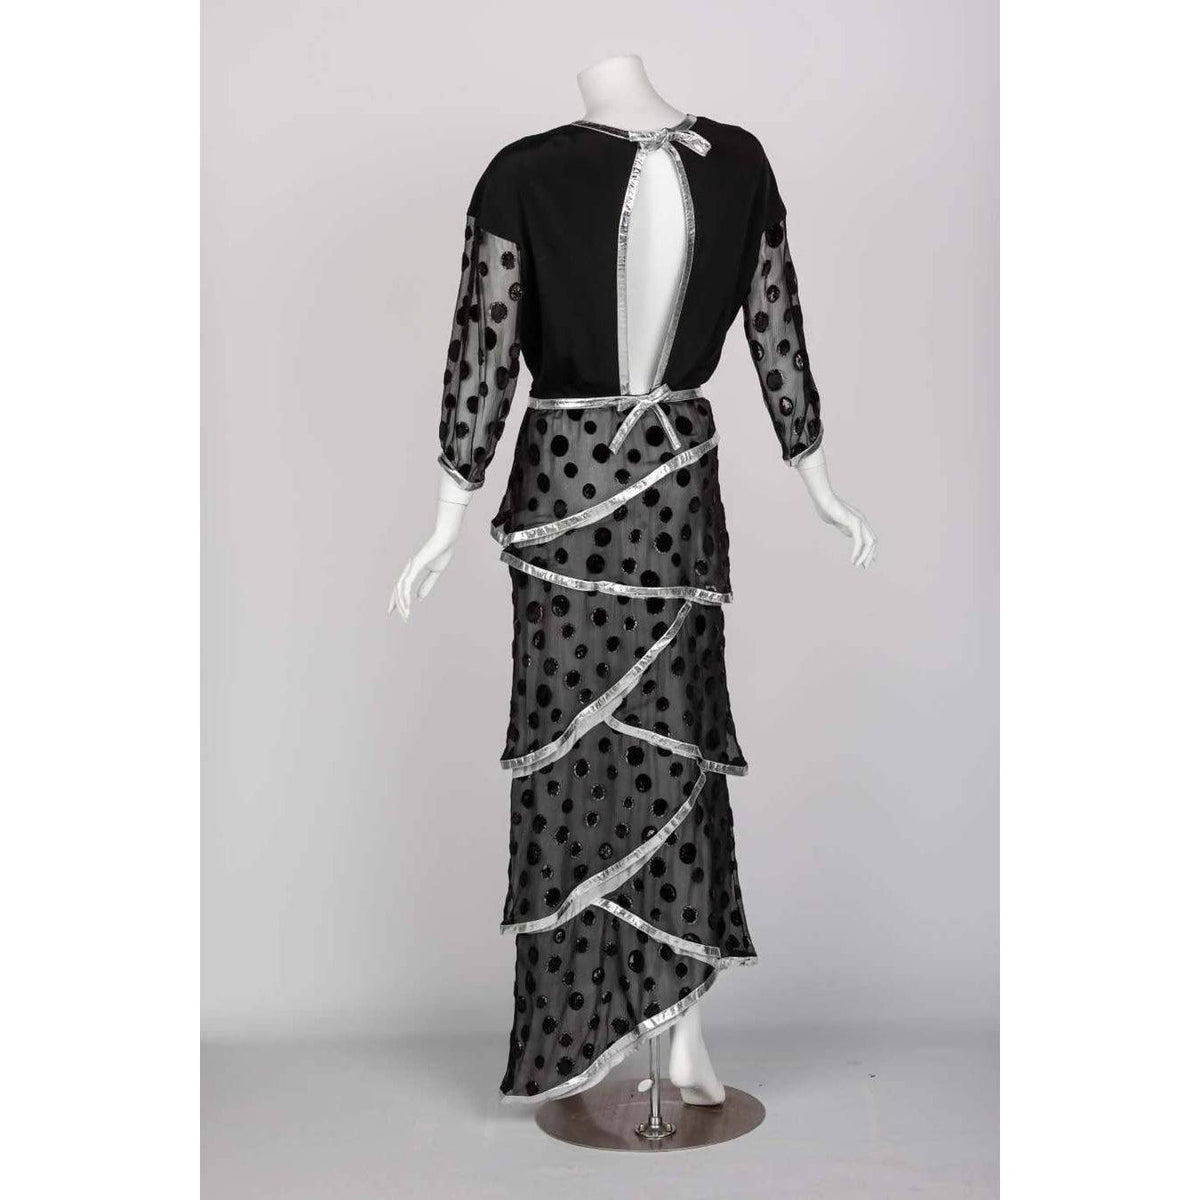 Pre-Owned COURREGES Black Metallic Polka Dot Dress | Size S/M - theREMODA